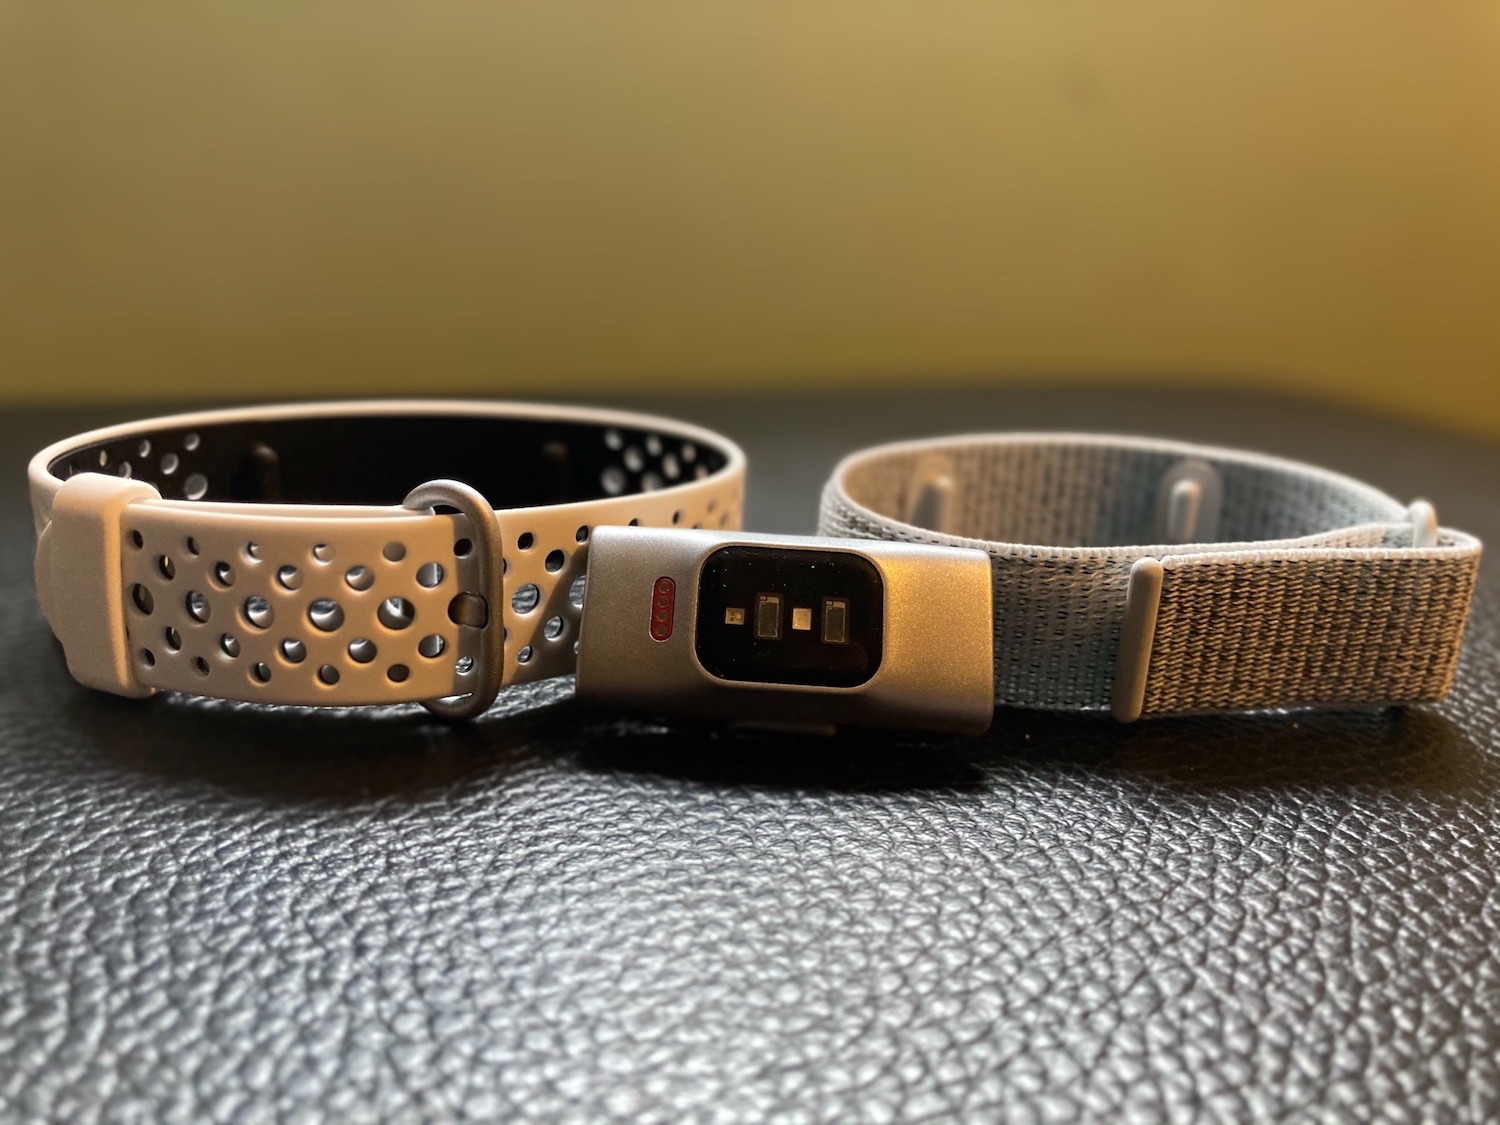 Halo Review: No-Fuss Fitness Band, Privacy Disaster